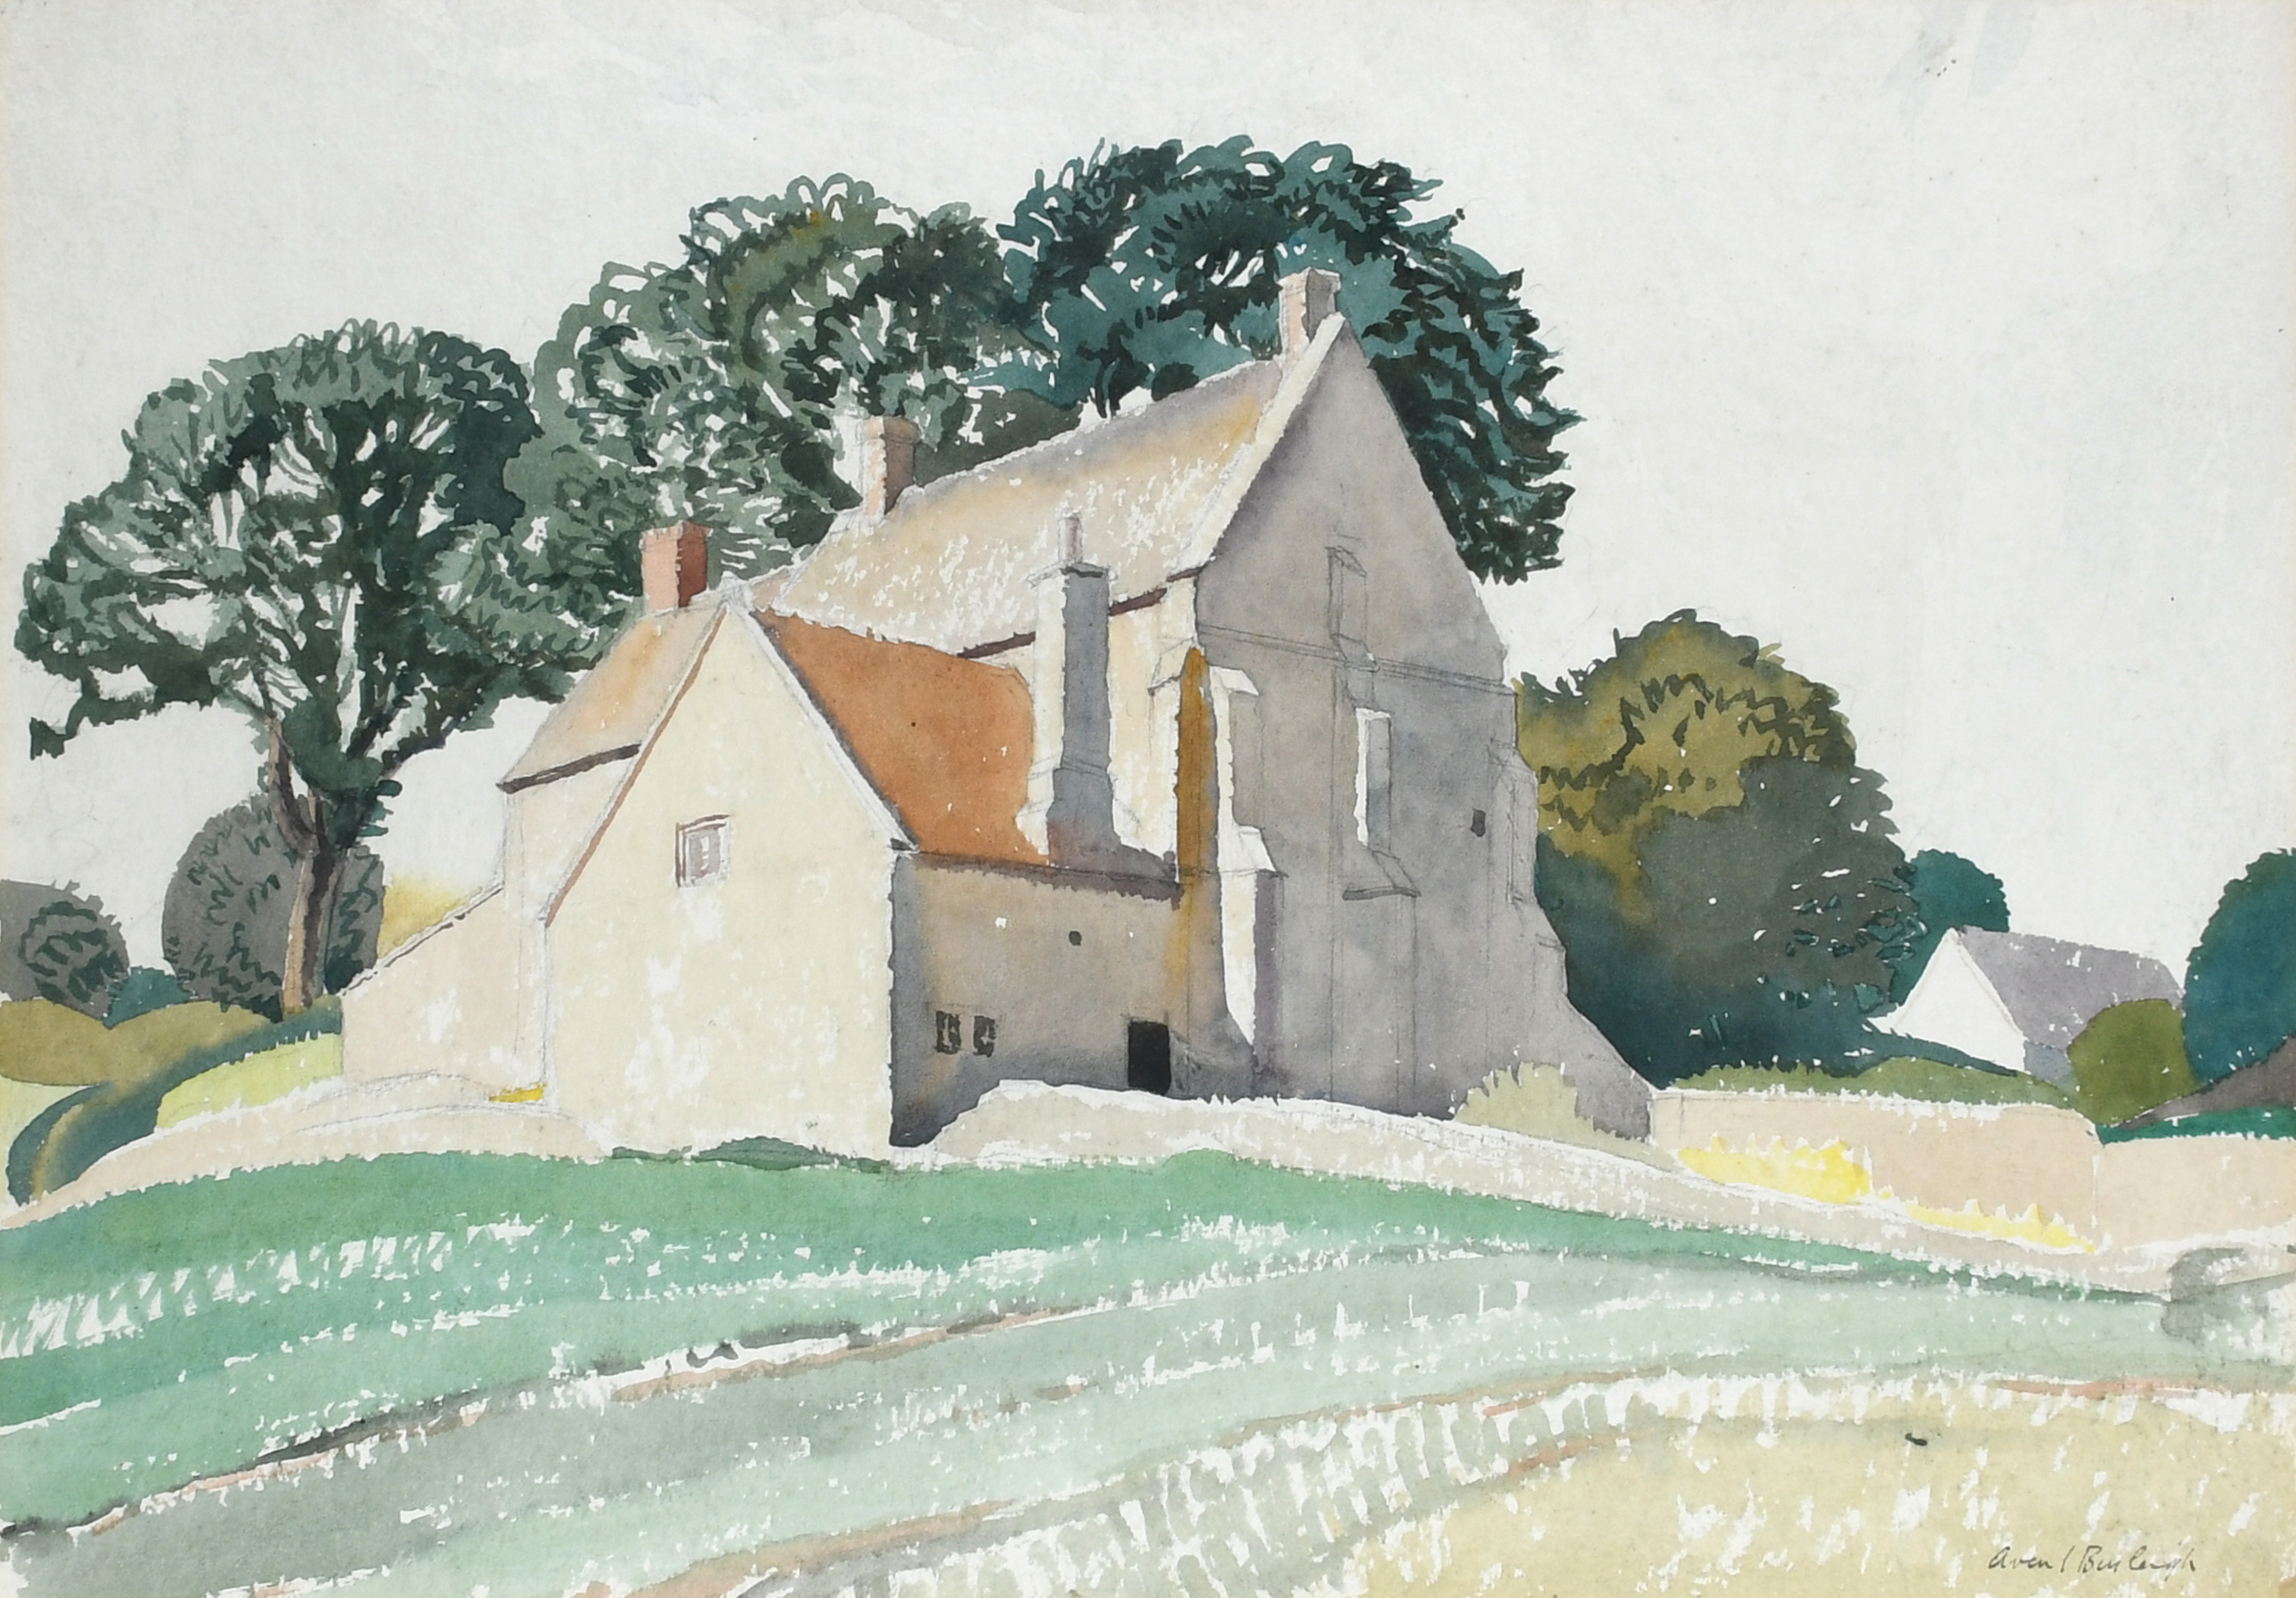 Averil Burleigh (1883-1949) A farmhouse in the Cotswolds Signed Averil Burleigh (lower right) Pencil